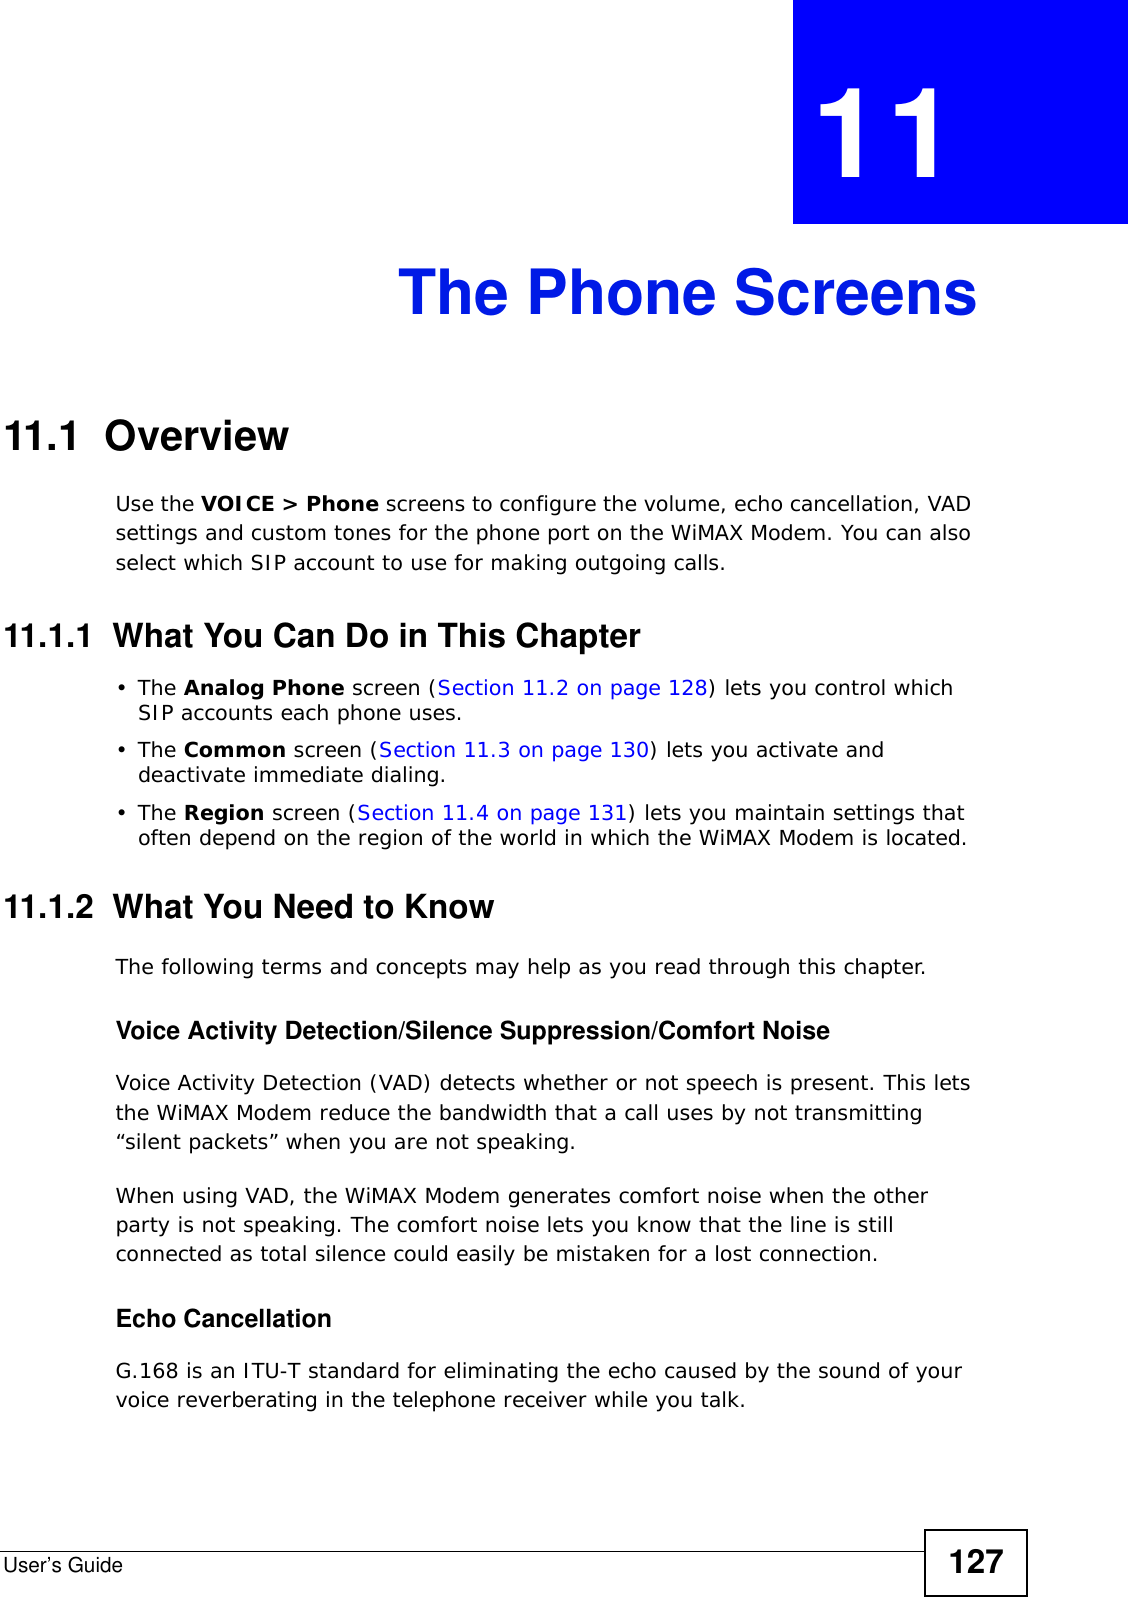 User’s Guide 127CHAPTER  11 The Phone Screens11.1  OverviewUse the VOICE &gt; Phone screens to configure the volume, echo cancellation, VAD settings and custom tones for the phone port on the WiMAX Modem. You can also select which SIP account to use for making outgoing calls.11.1.1  What You Can Do in This Chapter•The Analog Phone screen (Section 11.2 on page 128) lets you control which SIP accounts each phone uses.•The Common screen (Section 11.3 on page 130) lets you activate and deactivate immediate dialing.•The Region screen (Section 11.4 on page 131) lets you maintain settings that often depend on the region of the world in which the WiMAX Modem is located.11.1.2  What You Need to KnowThe following terms and concepts may help as you read through this chapter.Voice Activity Detection/Silence Suppression/Comfort NoiseVoice Activity Detection (VAD) detects whether or not speech is present. This lets the WiMAX Modem reduce the bandwidth that a call uses by not transmitting “silent packets” when you are not speaking.When using VAD, the WiMAX Modem generates comfort noise when the other party is not speaking. The comfort noise lets you know that the line is still connected as total silence could easily be mistaken for a lost connection.Echo Cancellation G.168 is an ITU-T standard for eliminating the echo caused by the sound of your voice reverberating in the telephone receiver while you talk.